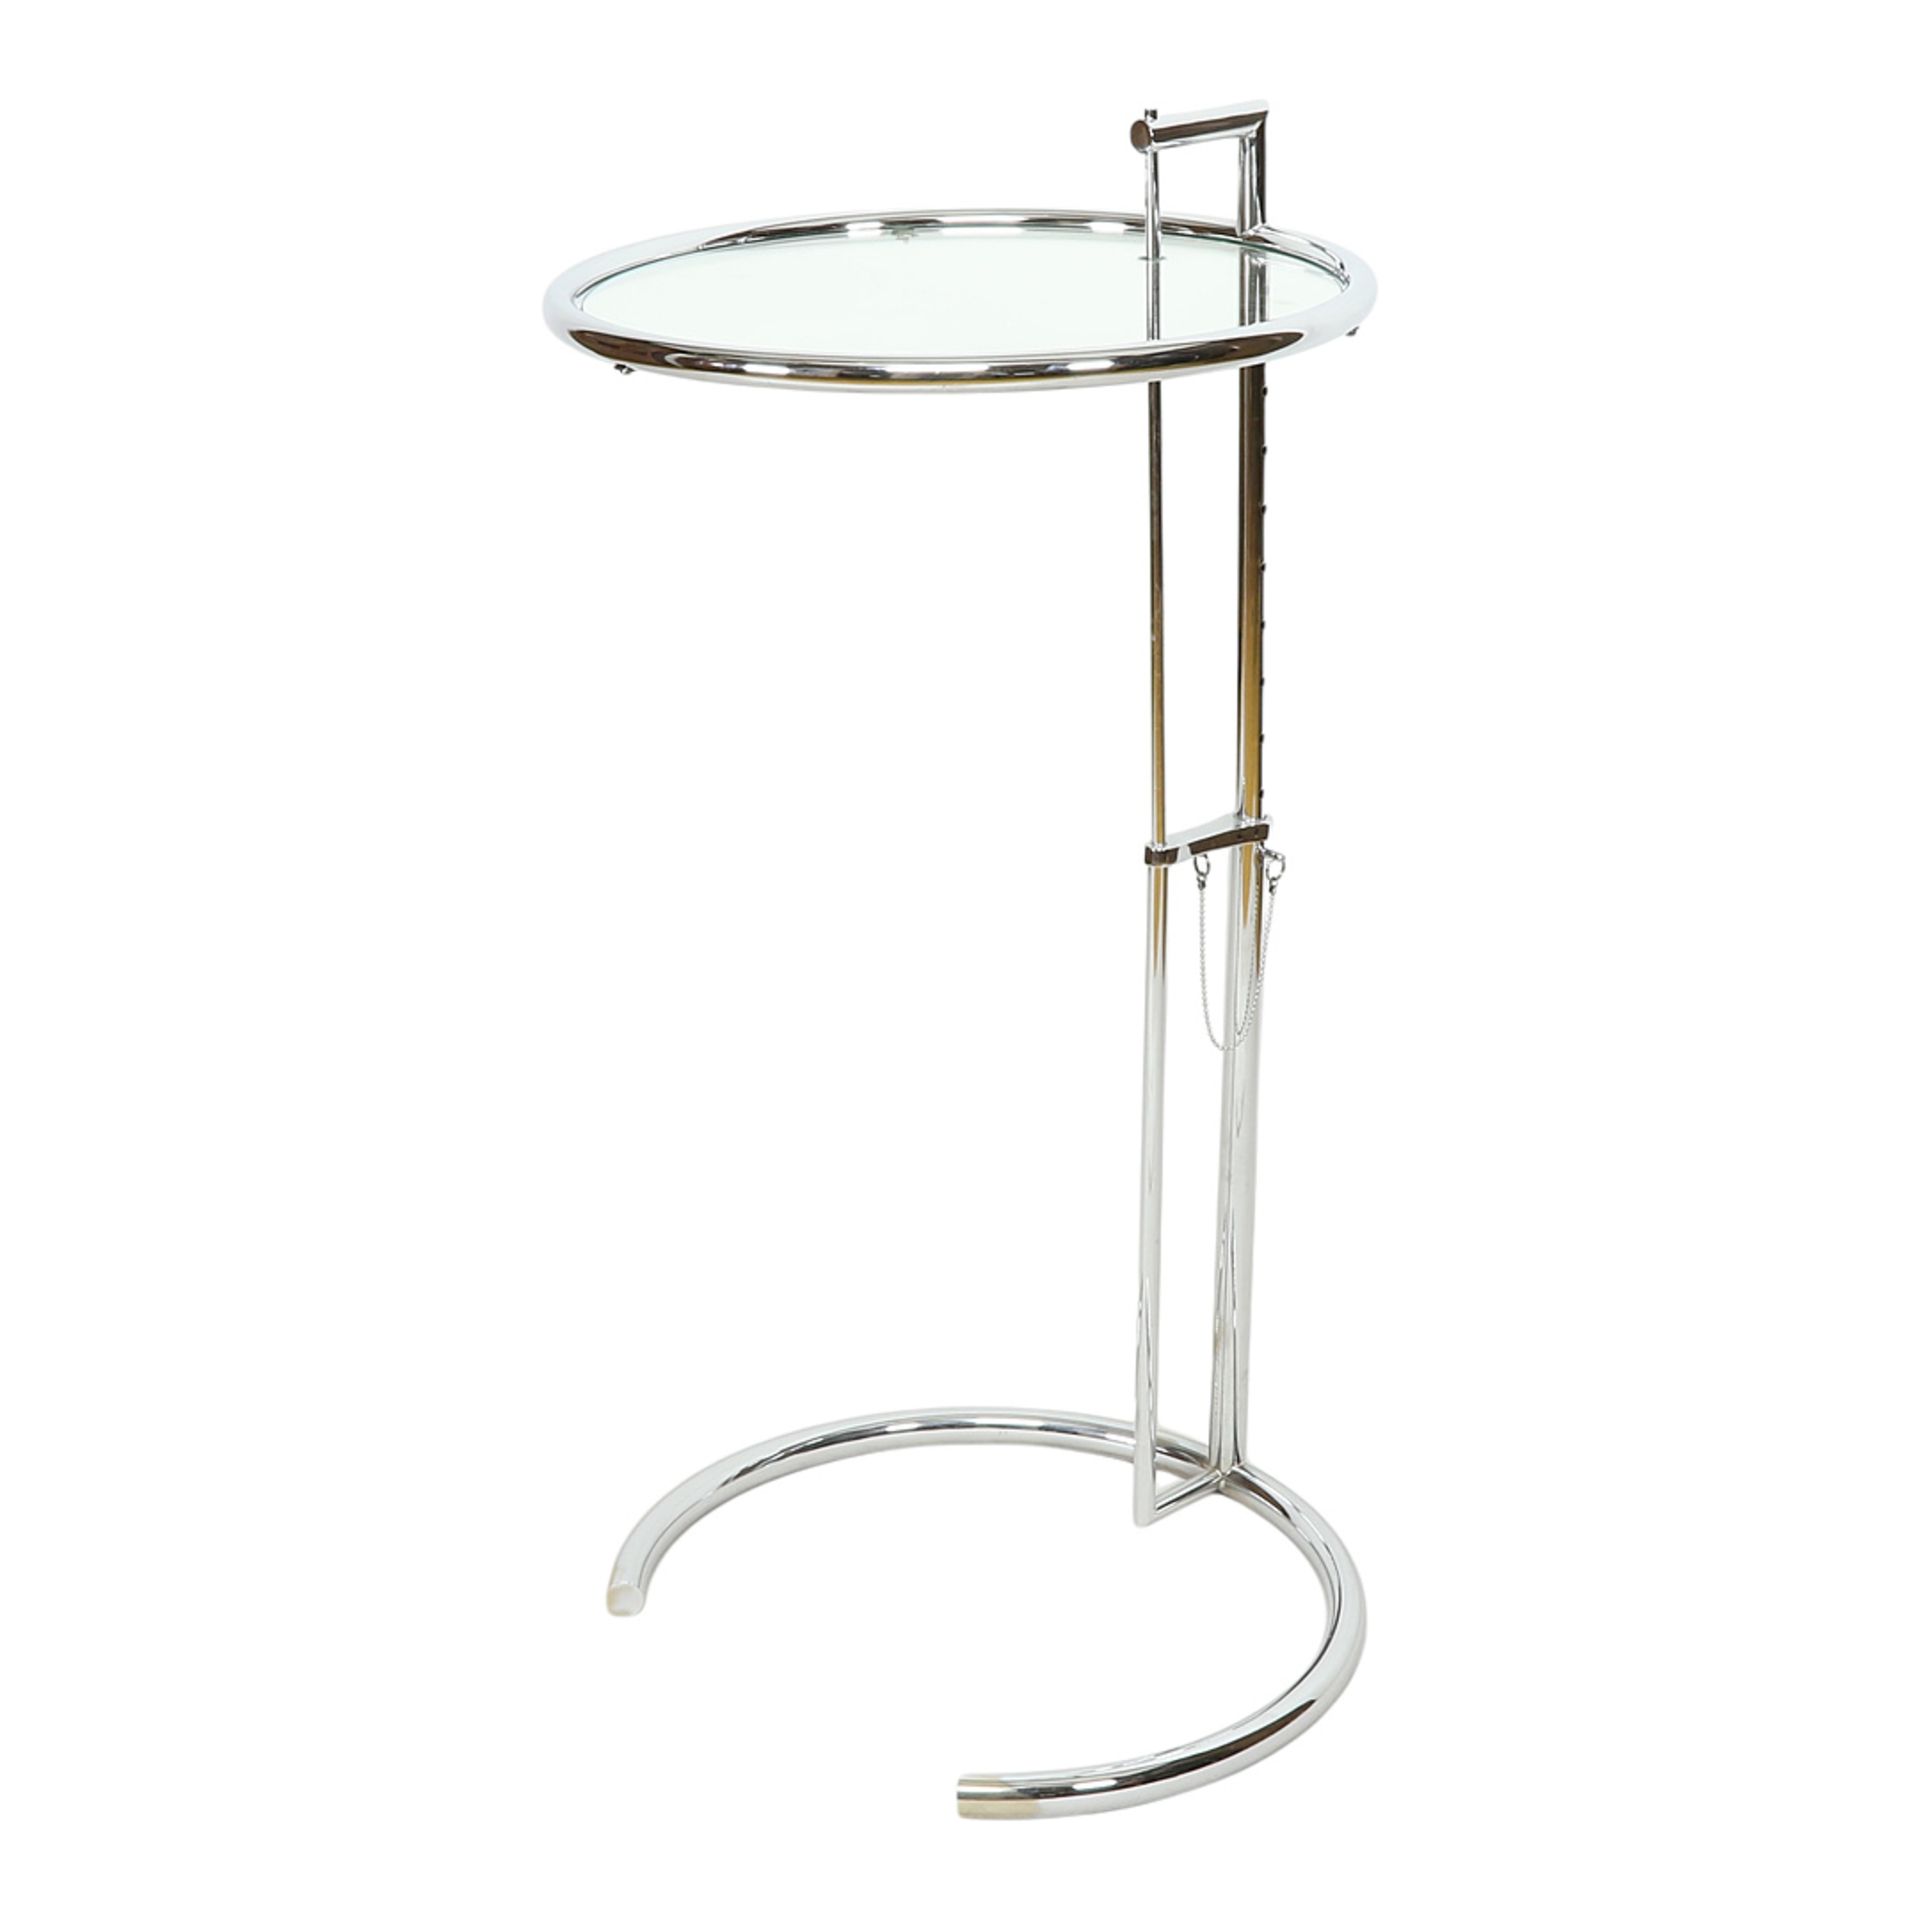 Eileen Gray Modern side table E.1027 "Adjustable Table" - Image 3 of 4